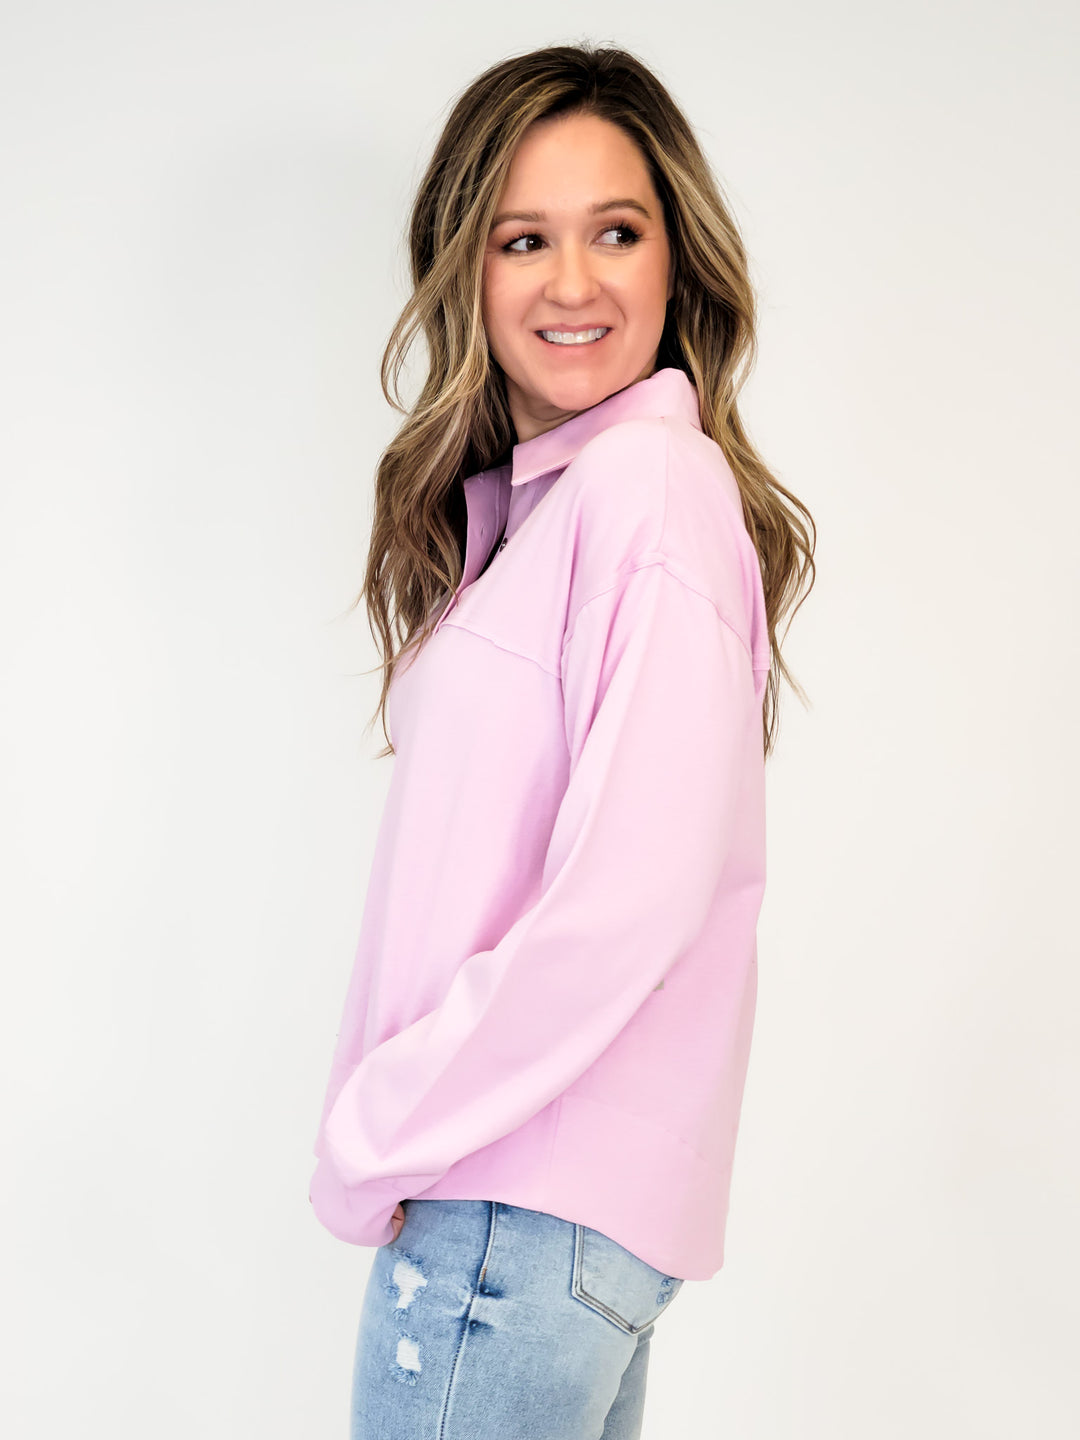 RELAXED FIT RIBBED LONG SLEEVE HENLEY TOP - PINK